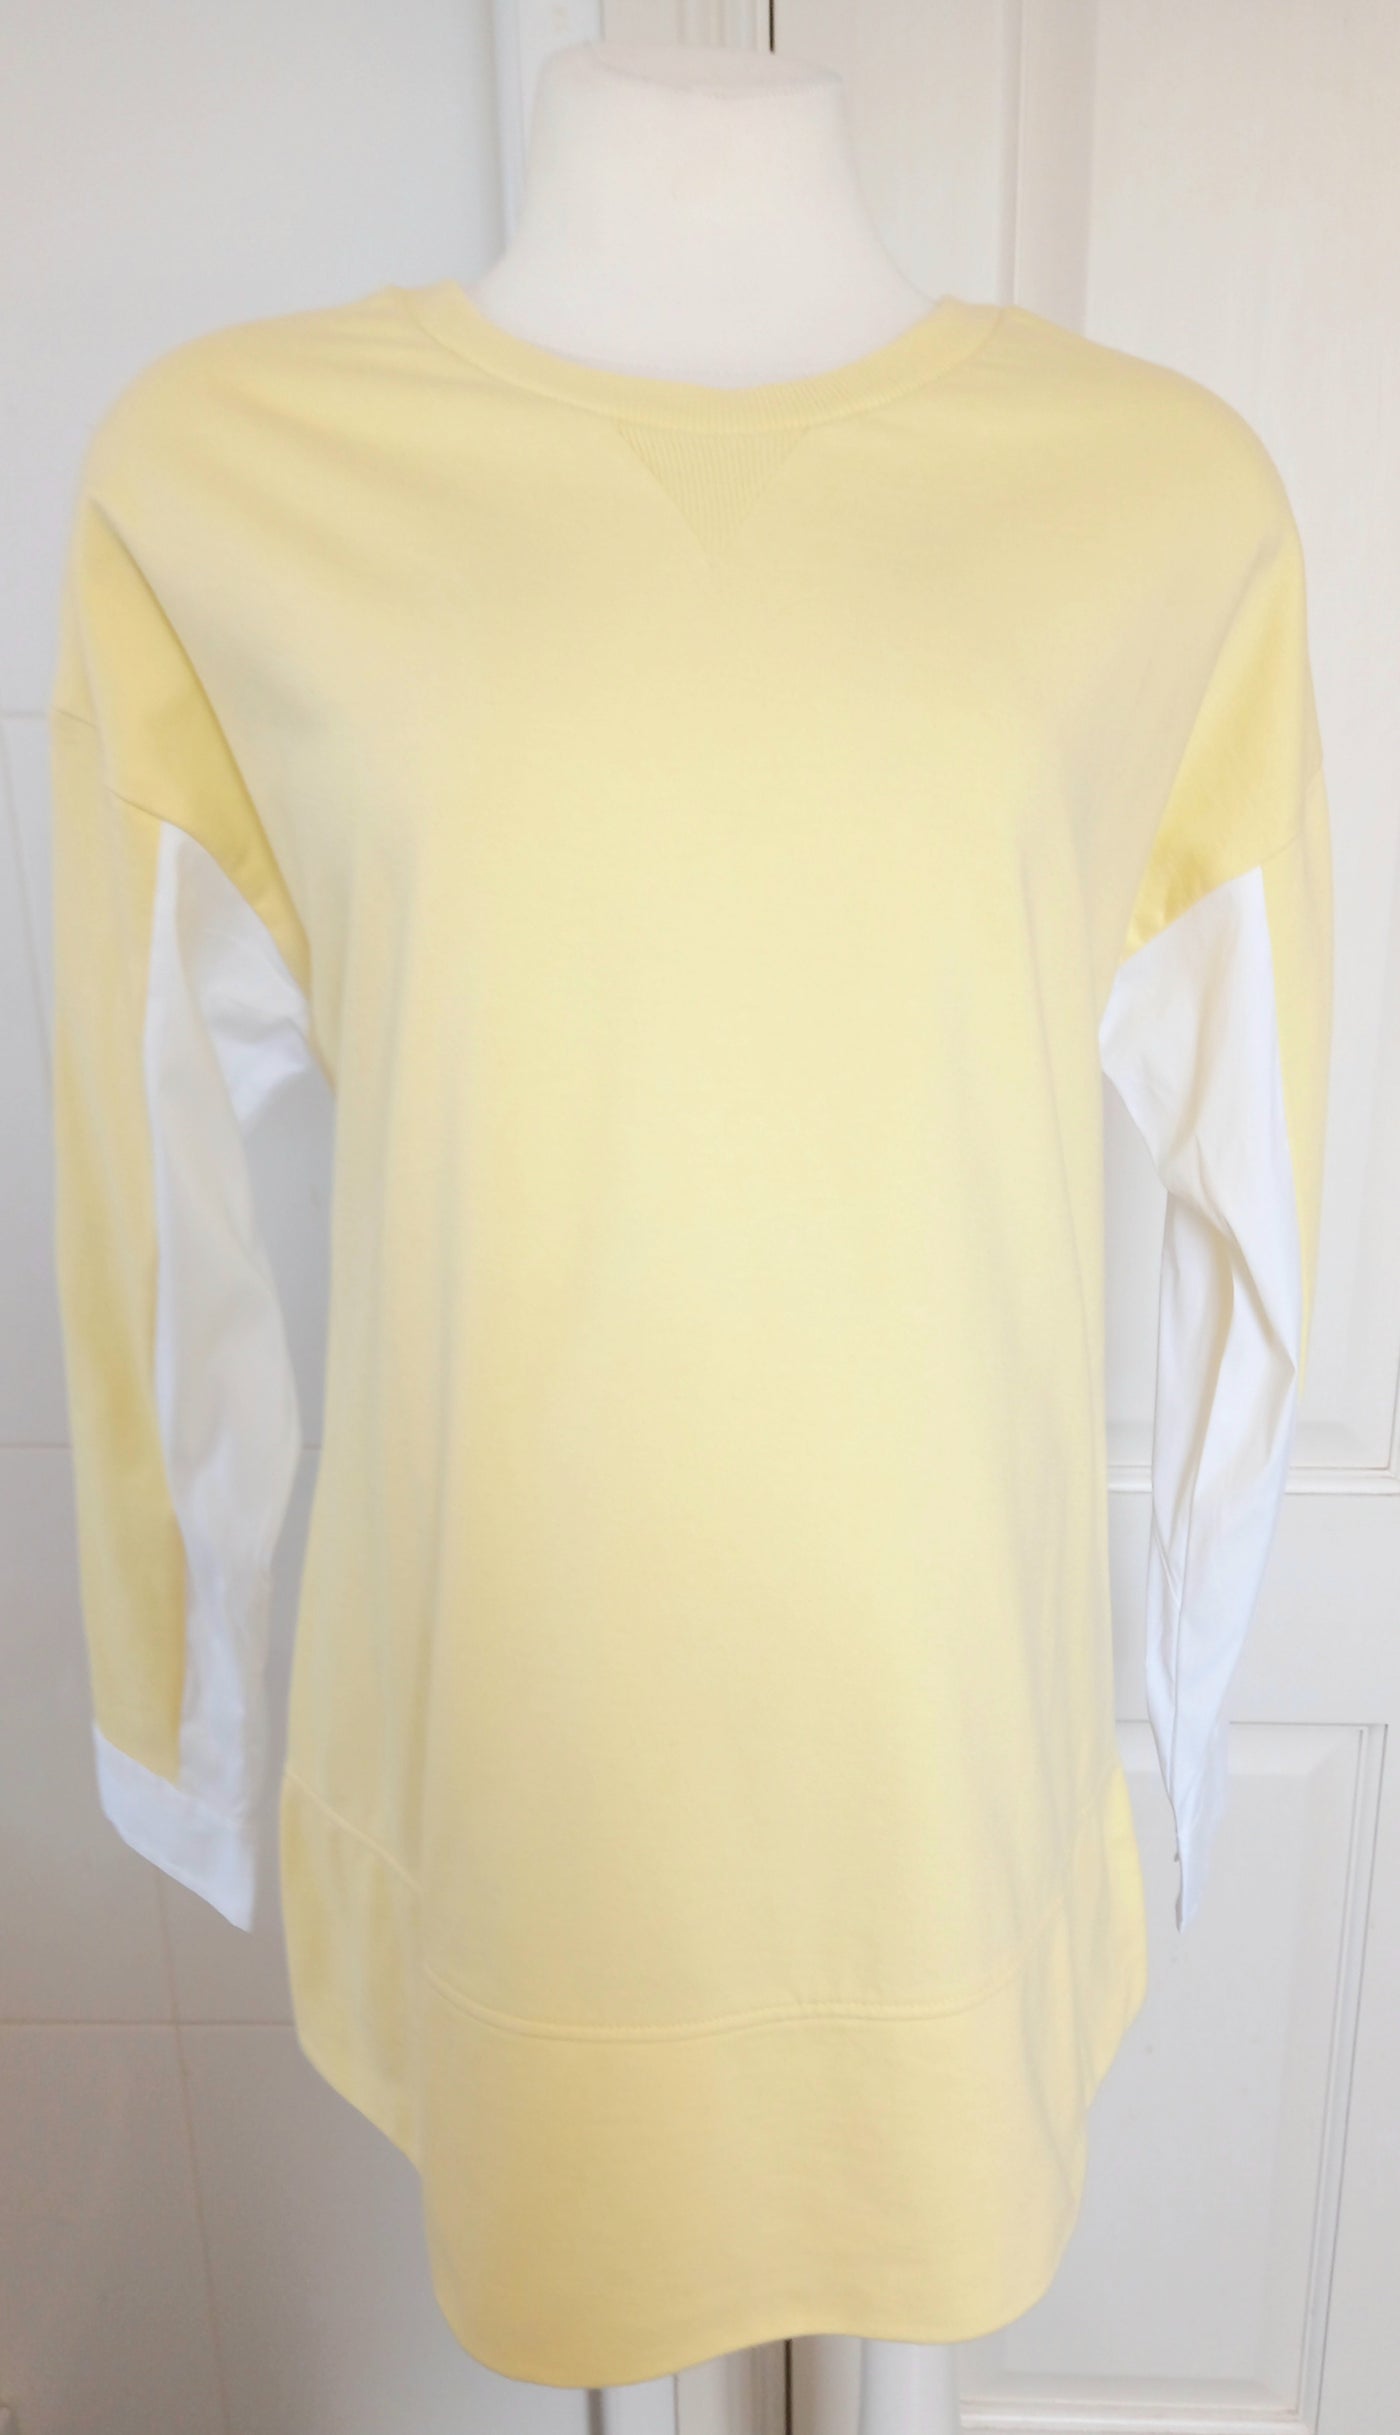 Next Maternity Yellow Jumper with White Shirt Back - Size 12